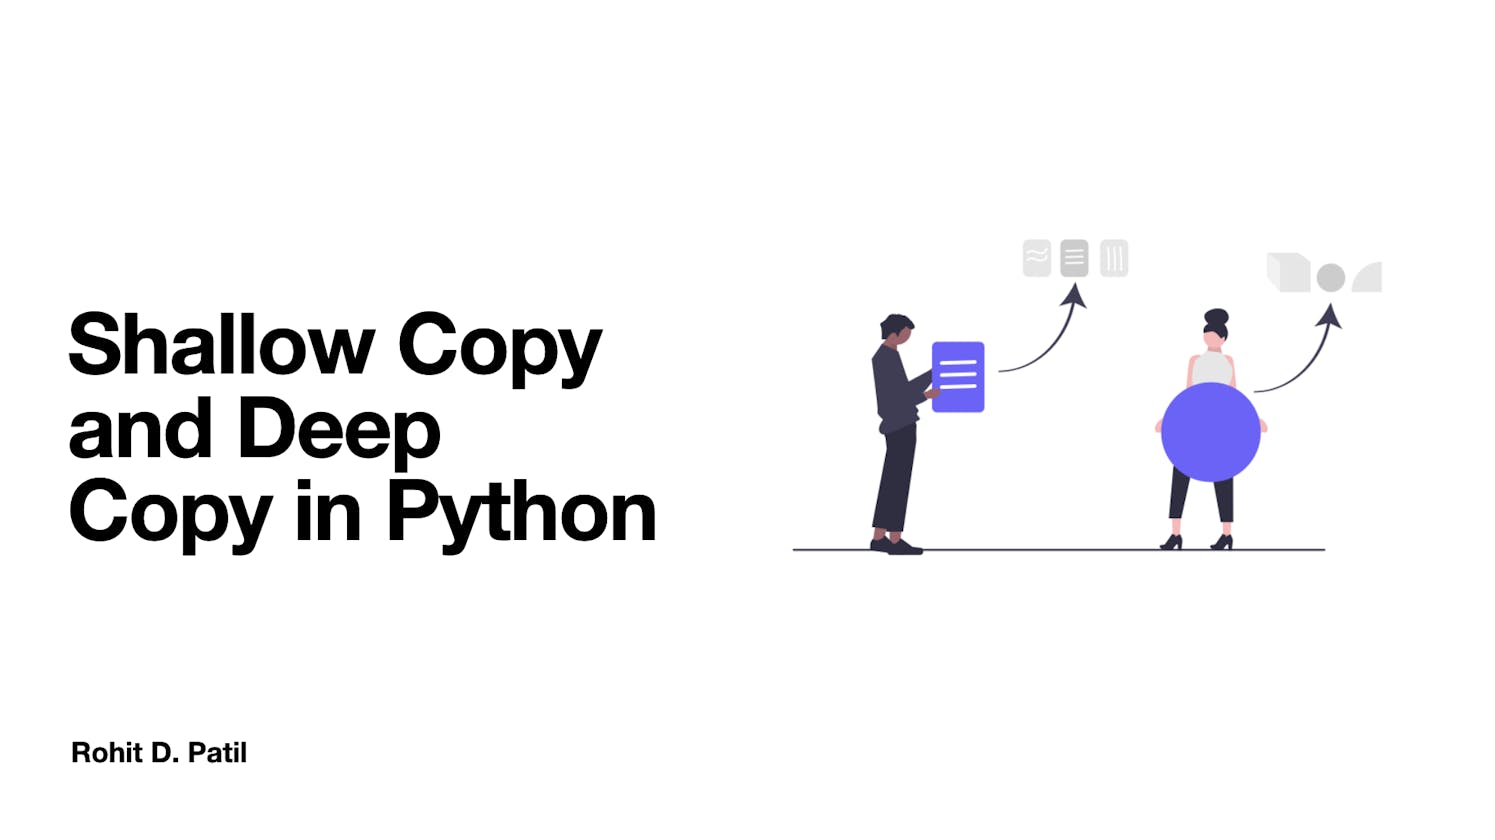 Shallow Copy and Deep Copy in Python